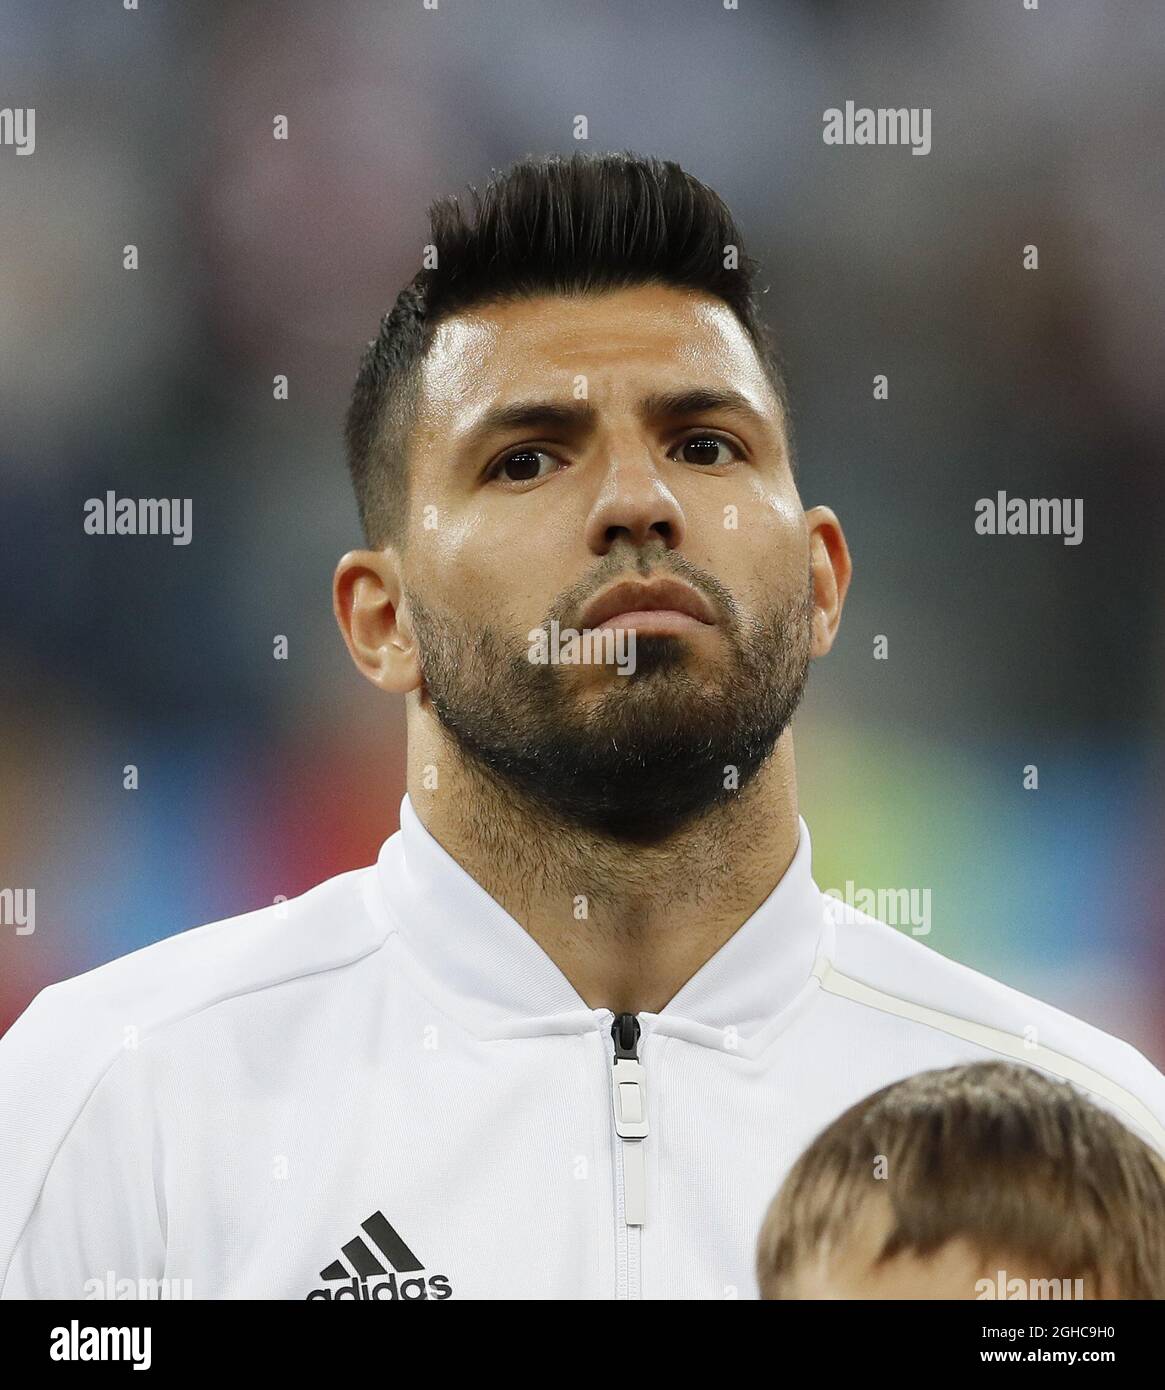 Argentina's Sergio Aguero in action during the FIFA World Cup 2018 Group D match at the Nizhny Novgorod Stadium, Nizhny Novgorod. Picture date 21st June 2018. Picture credit should read: David Klein/Sportimage via PA Images Stock Photo